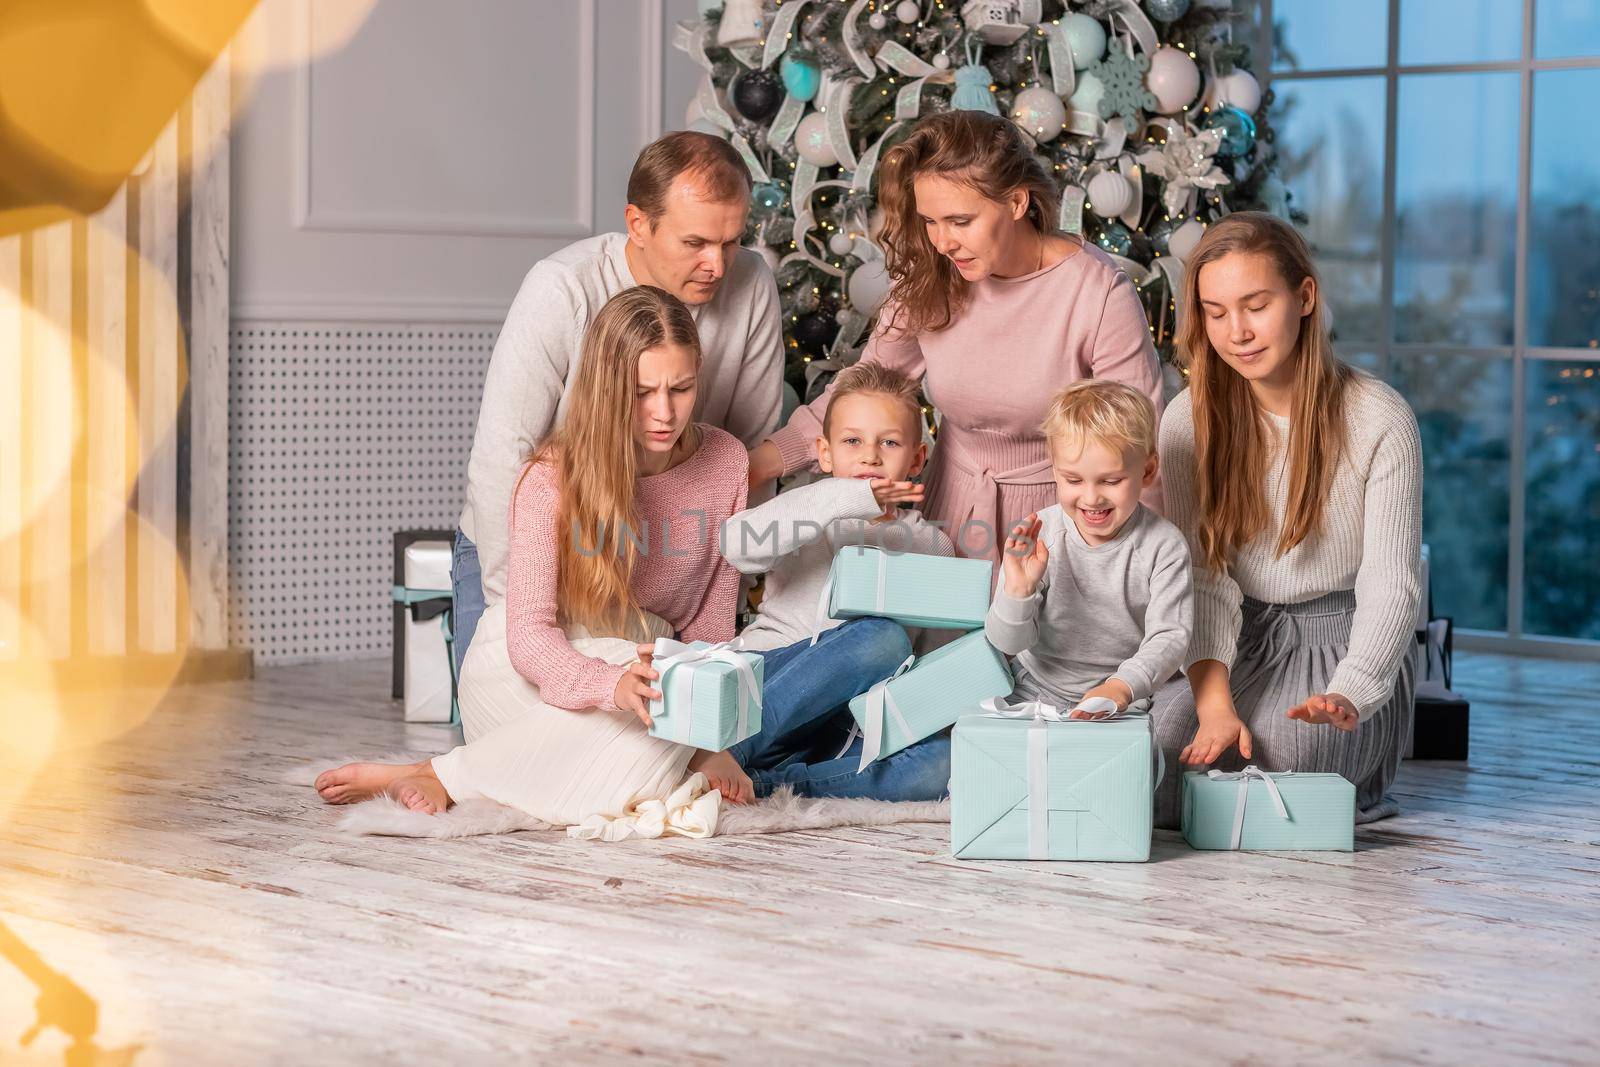 Big Happy family with many kids having fun and opening presents under the Christmas tree. Christmas family eve, christmas mood concept